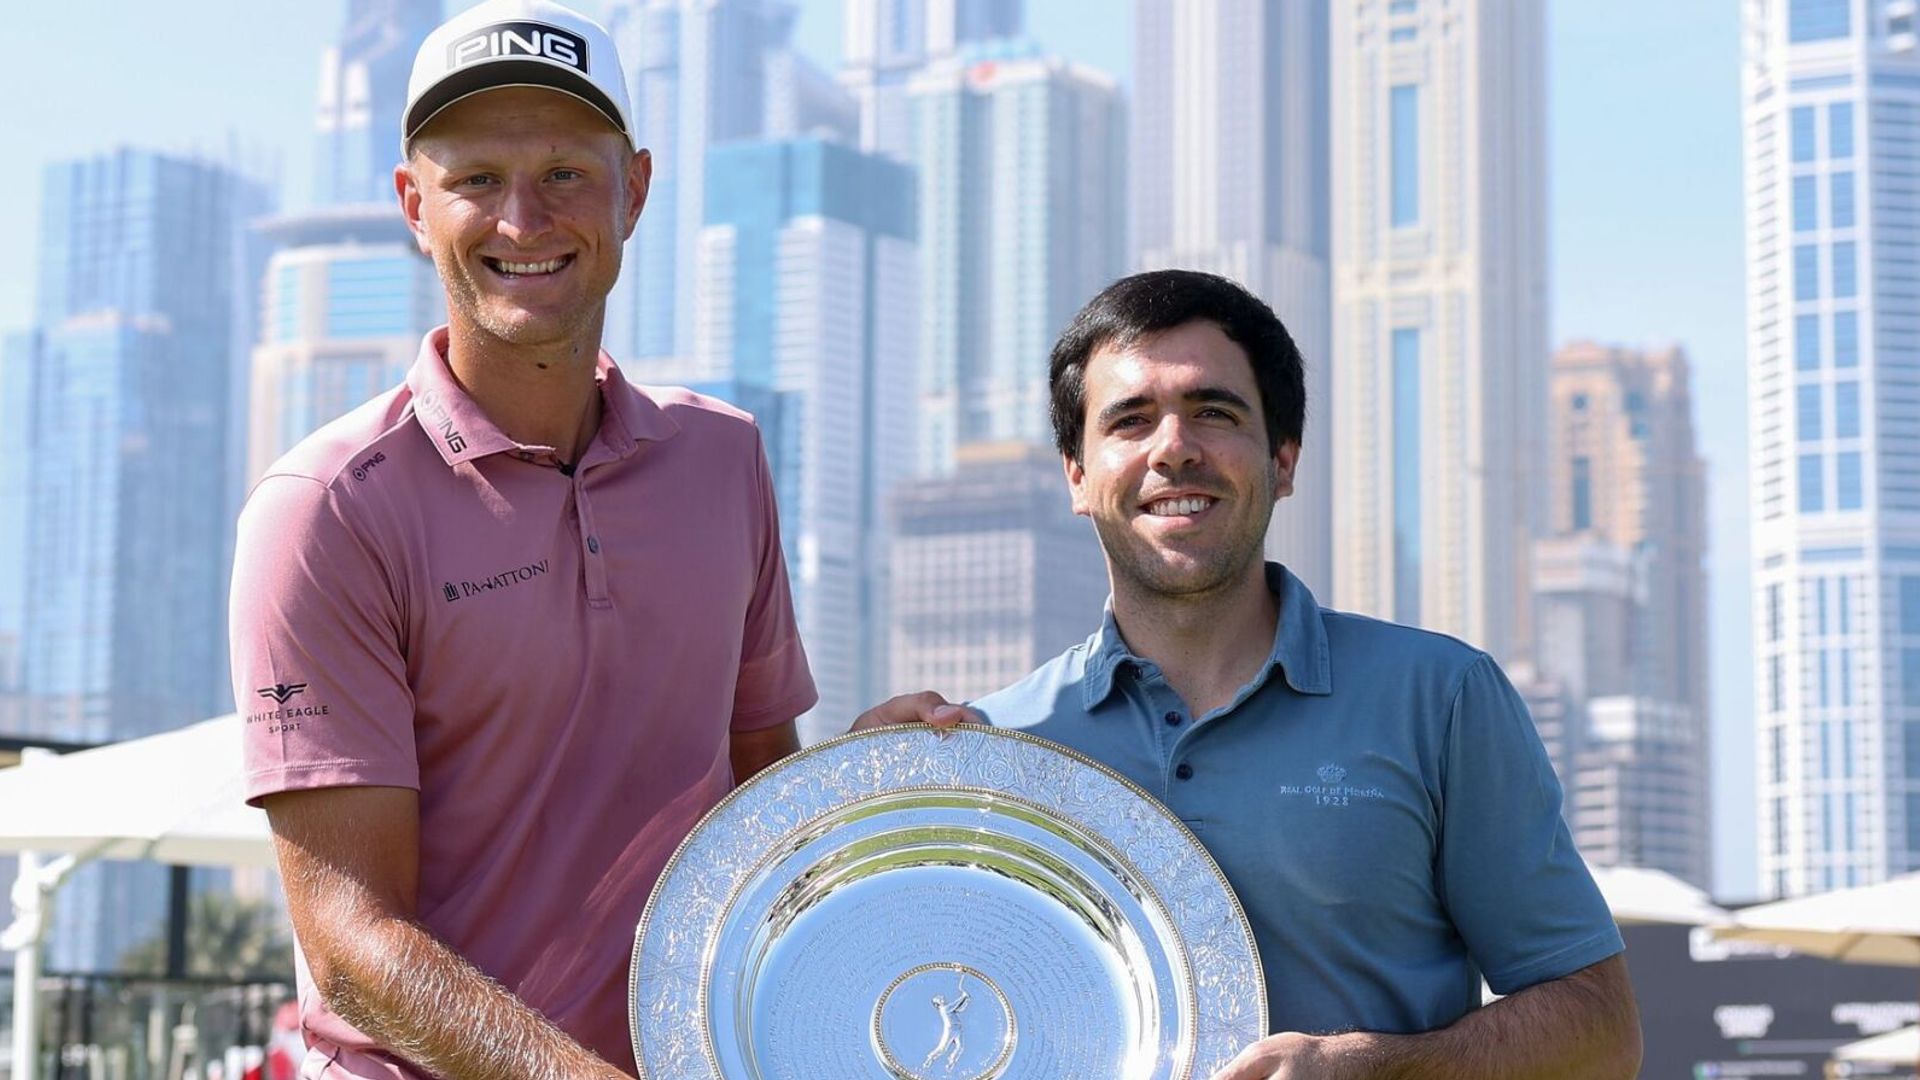 Meronk beats McIlroy and Hovland to Player of the Year award